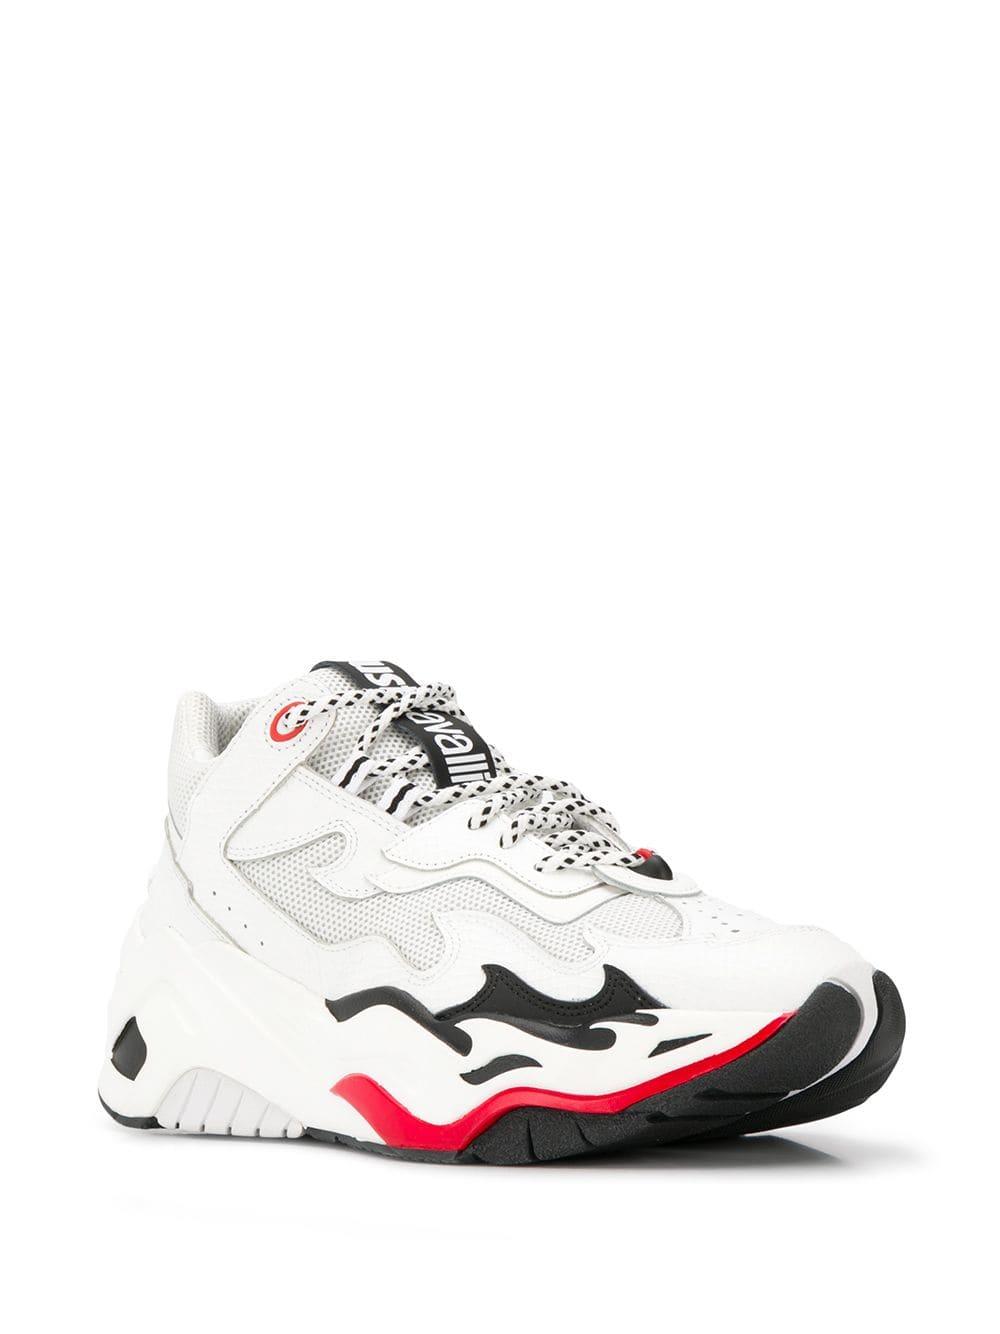 Just Cavalli P1thon Sneakers in White for Men - Lyst